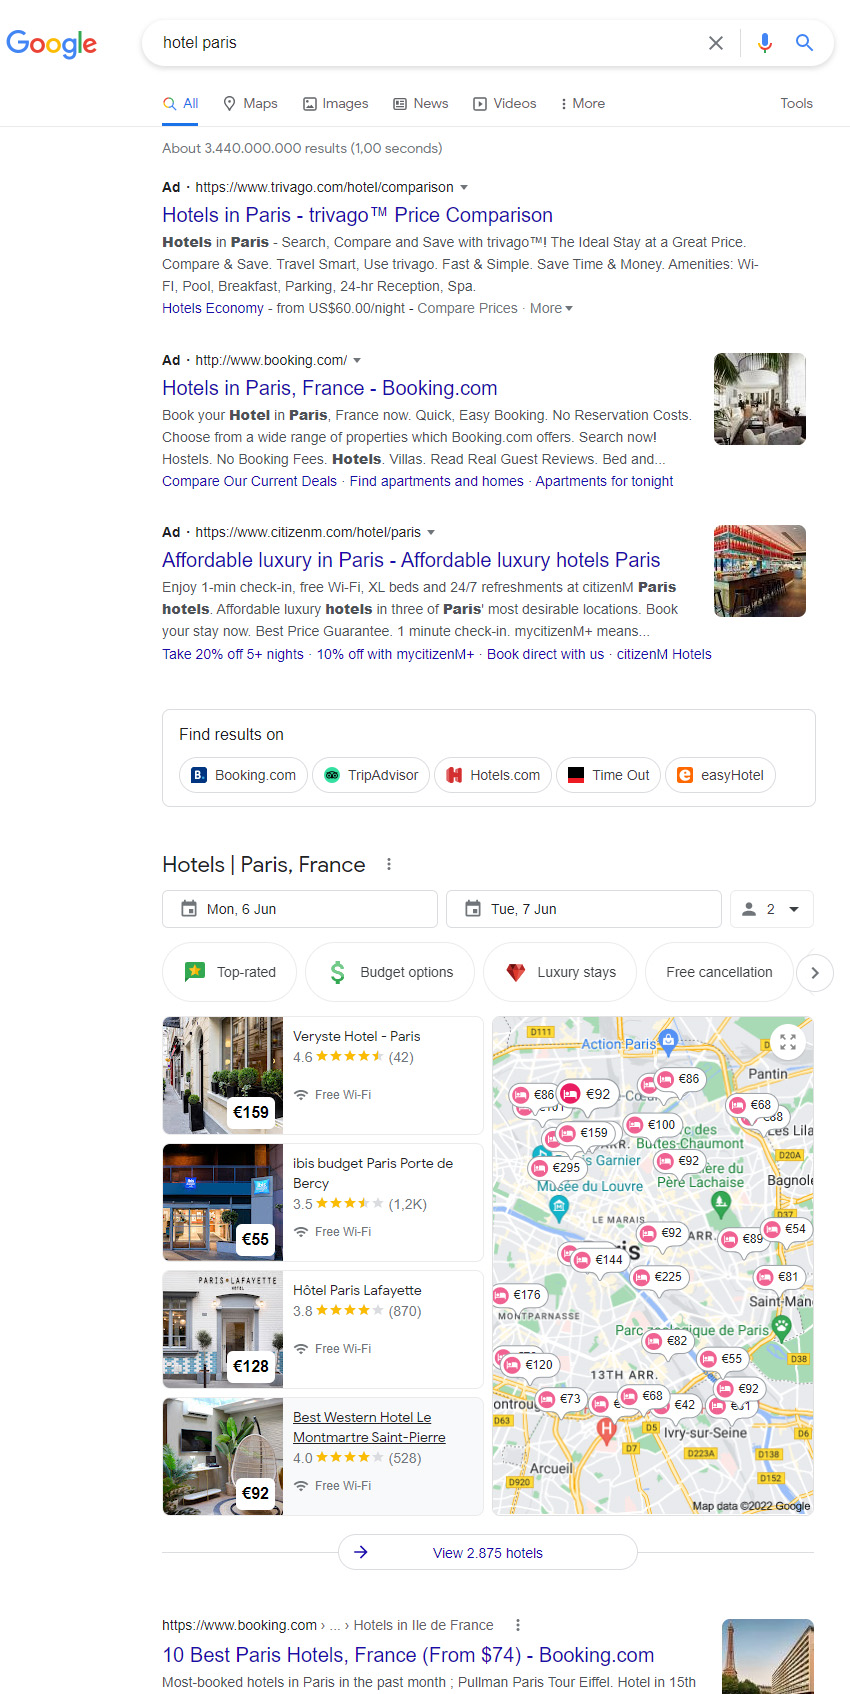 Google Hotel Ads example within the Search Engine Result Pages